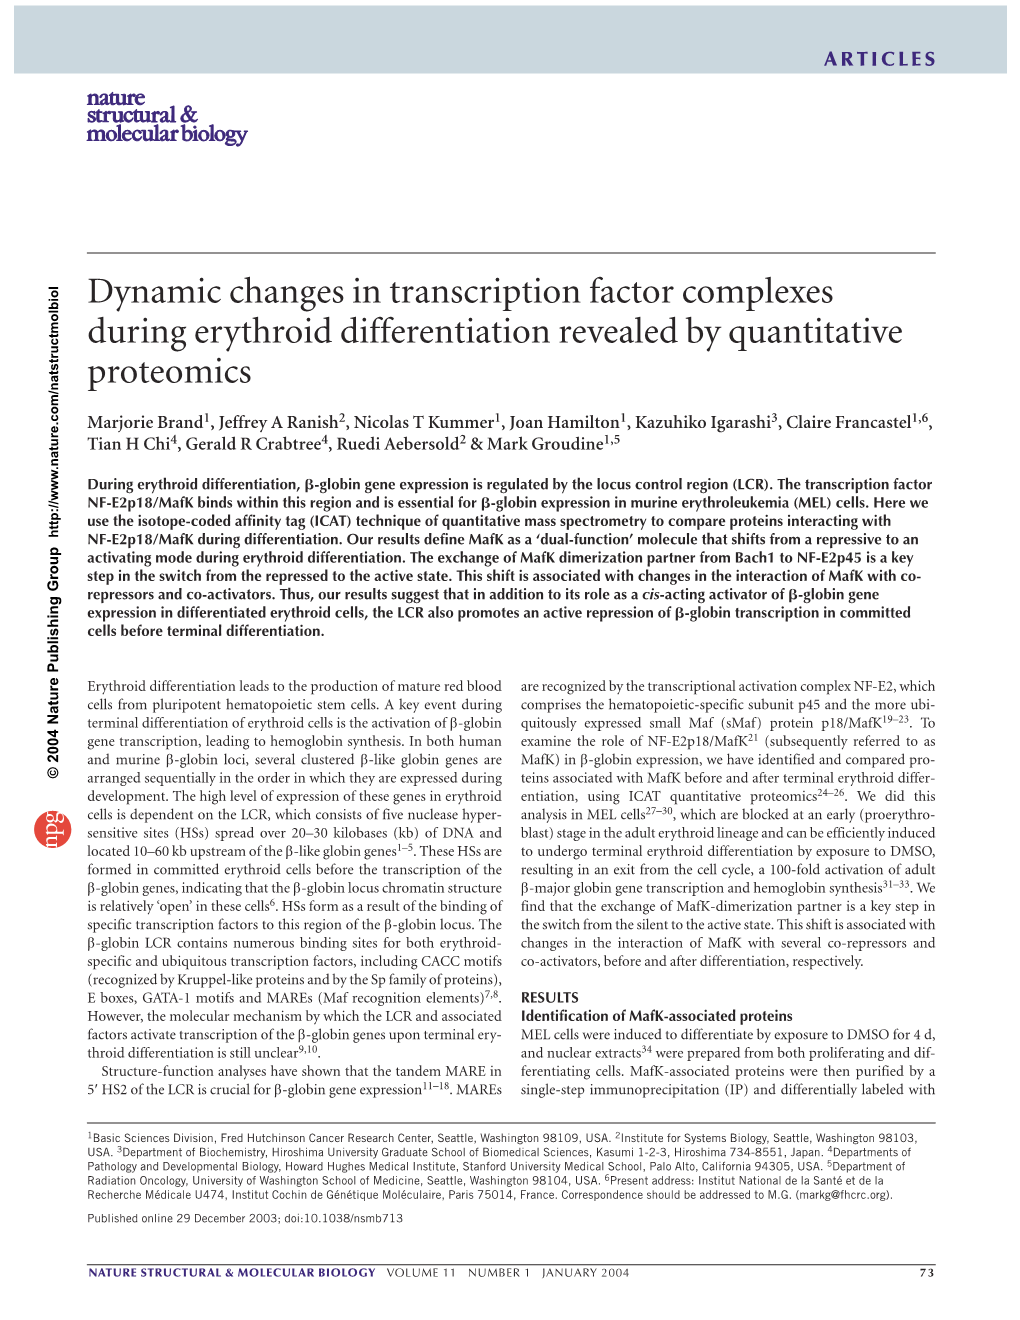 Dynamic Changes in Transcription Factor Complexes During Erythroid Differentiation Revealed by Quantitative Proteomics